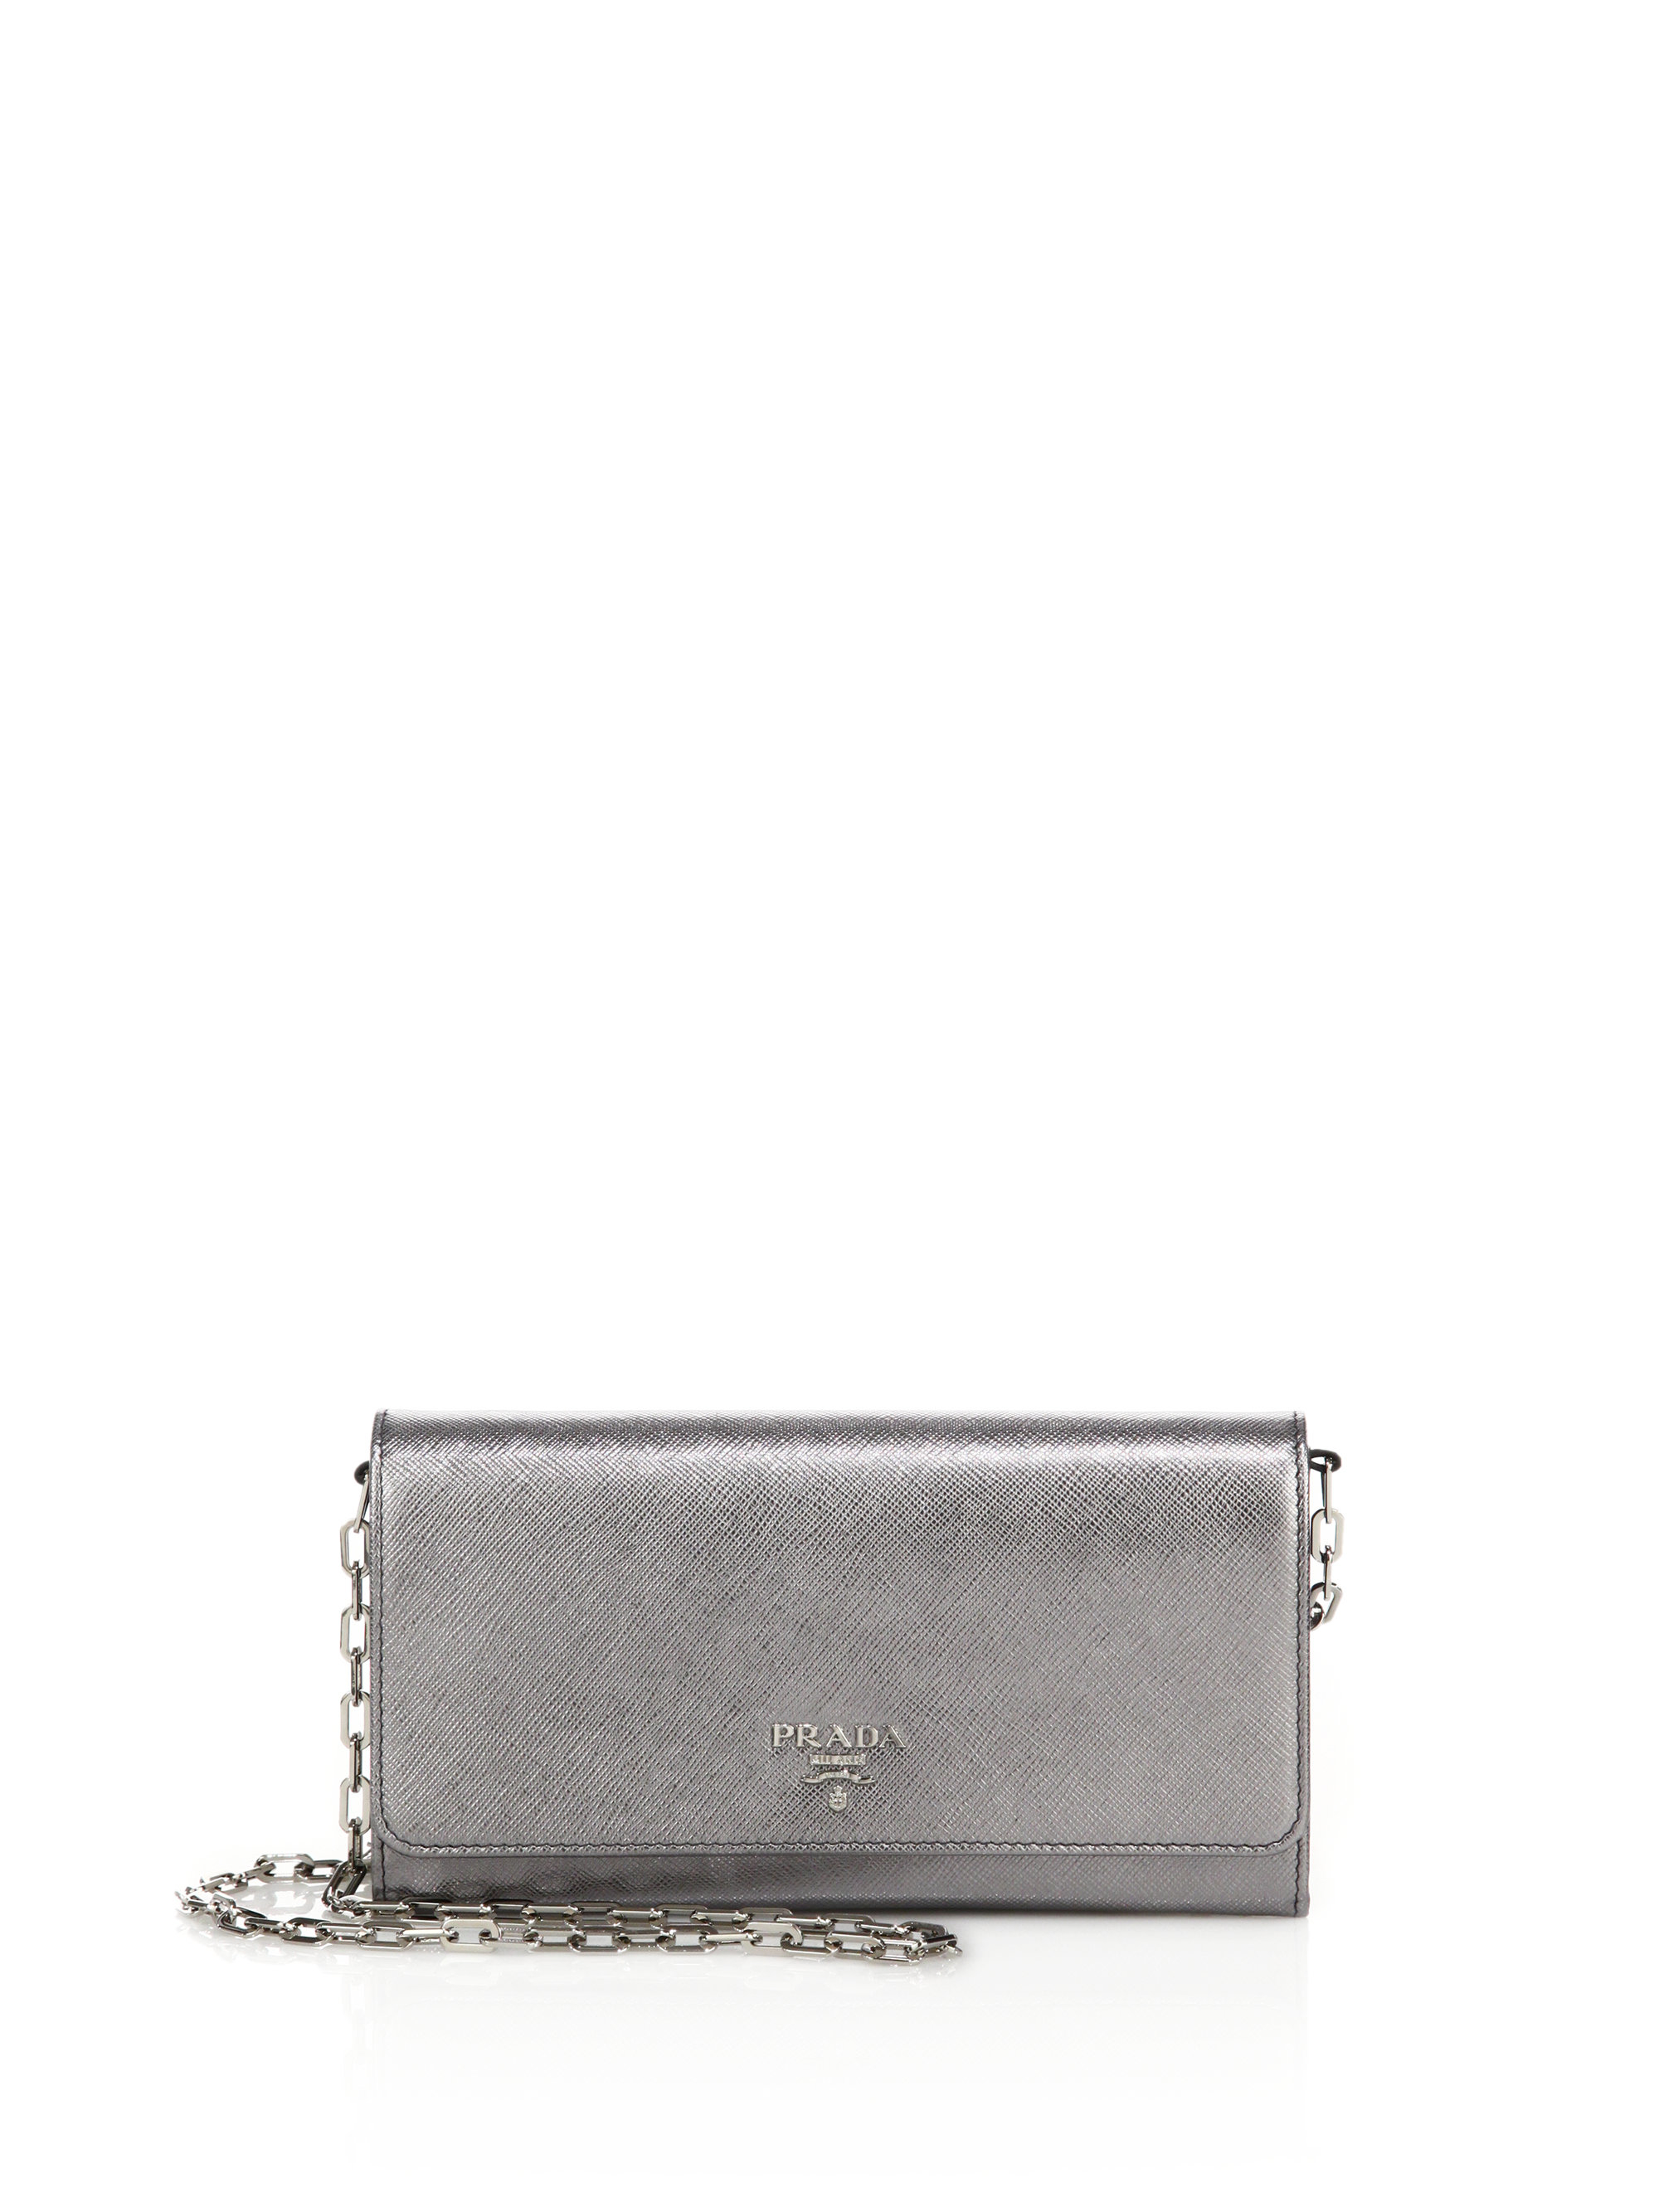 Prada Saffiano Leather Chain Wallet in Gold (cromo) | Lyst  